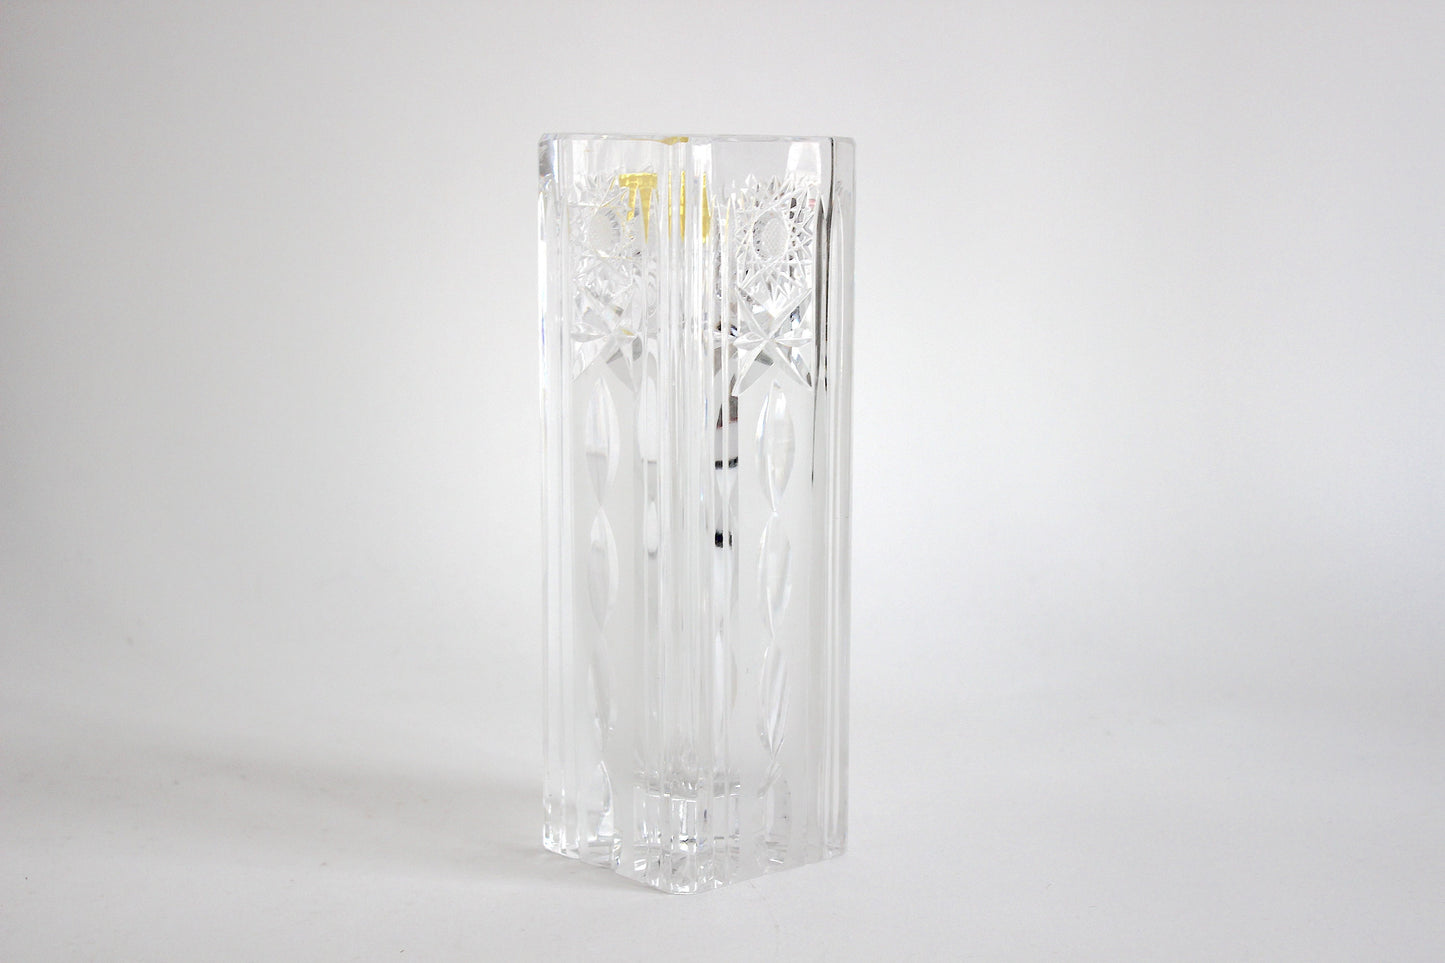 Vintage 1970s H.G. Echt Bleikristall Lead Crystal Vase from Austria, Sunflower Motif, 21cm Hand-Cut Square Design, Collectible Glass